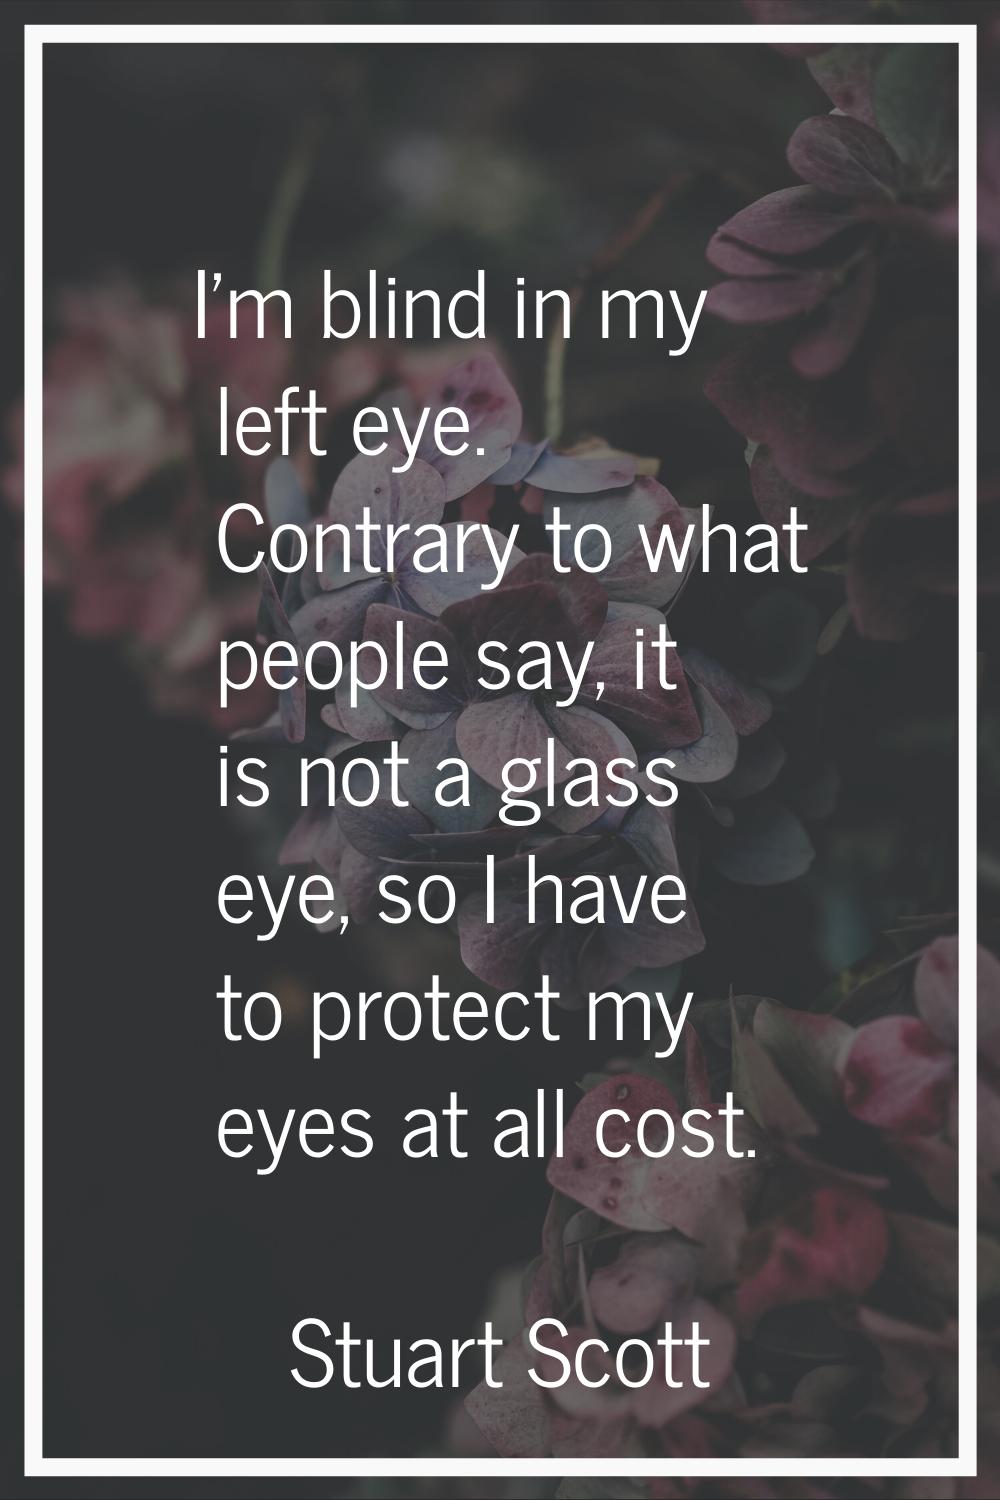 I'm blind in my left eye. Contrary to what people say, it is not a glass eye, so I have to protect 